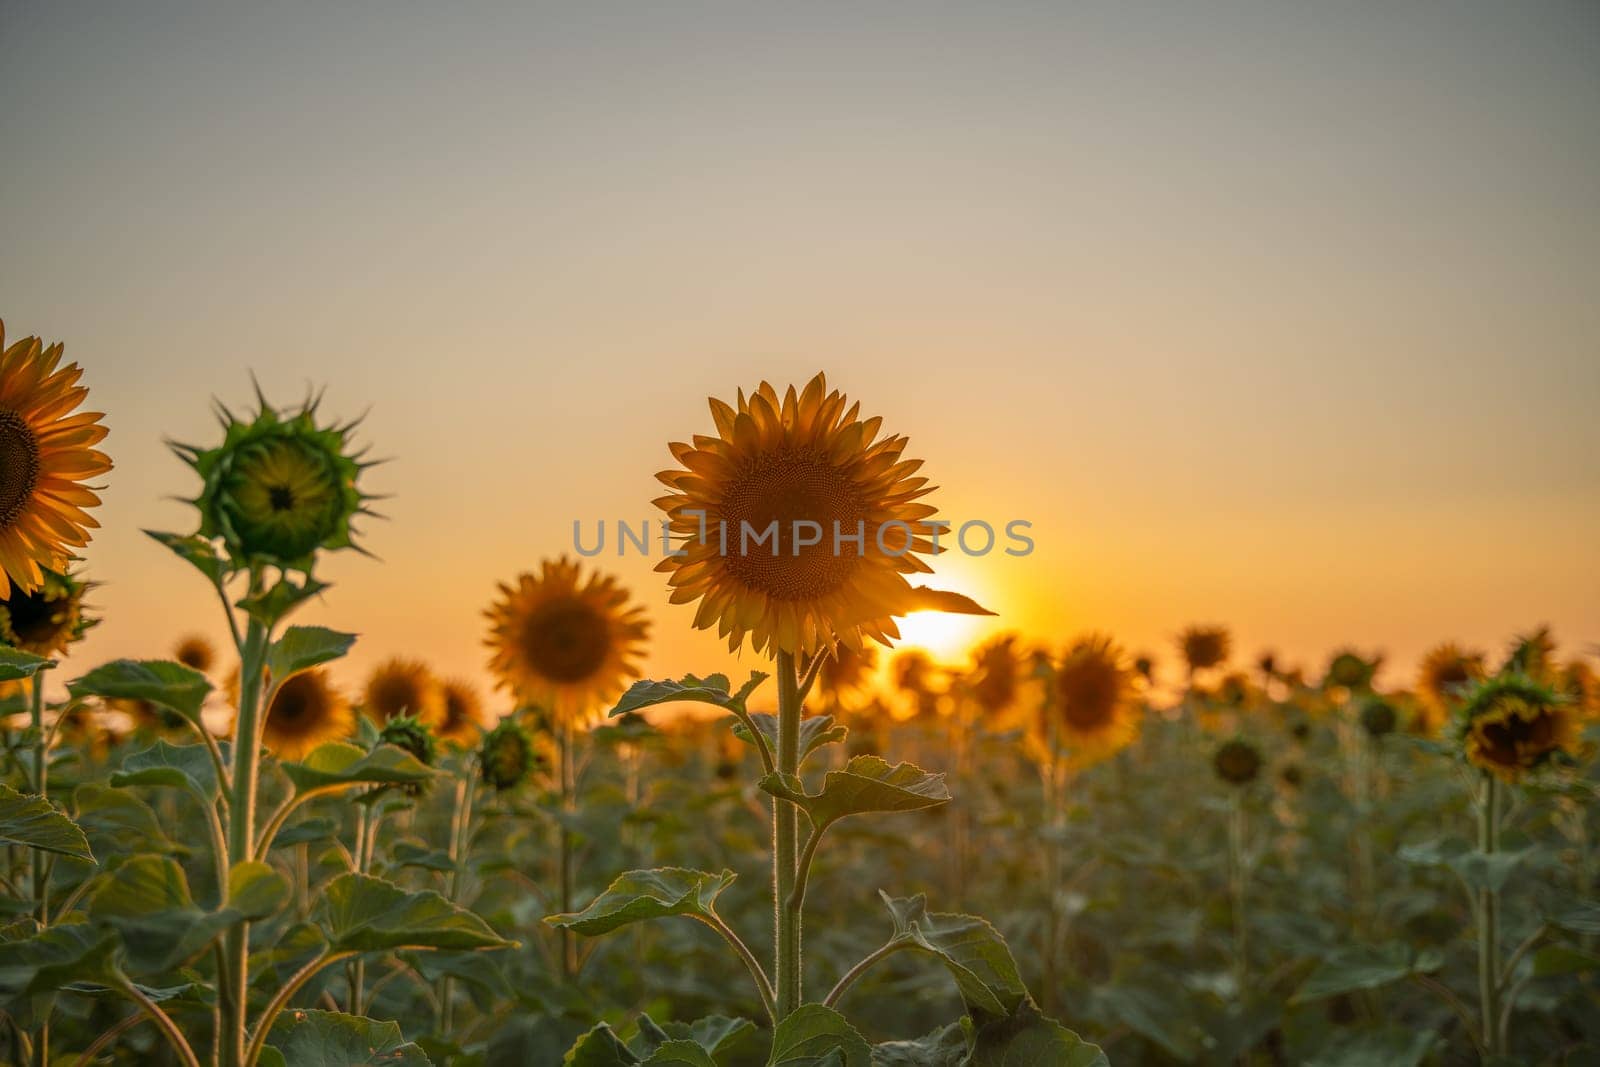 Field sunflowers in the warm light of the setting sun. Summer time. Concept agriculture oil production growing